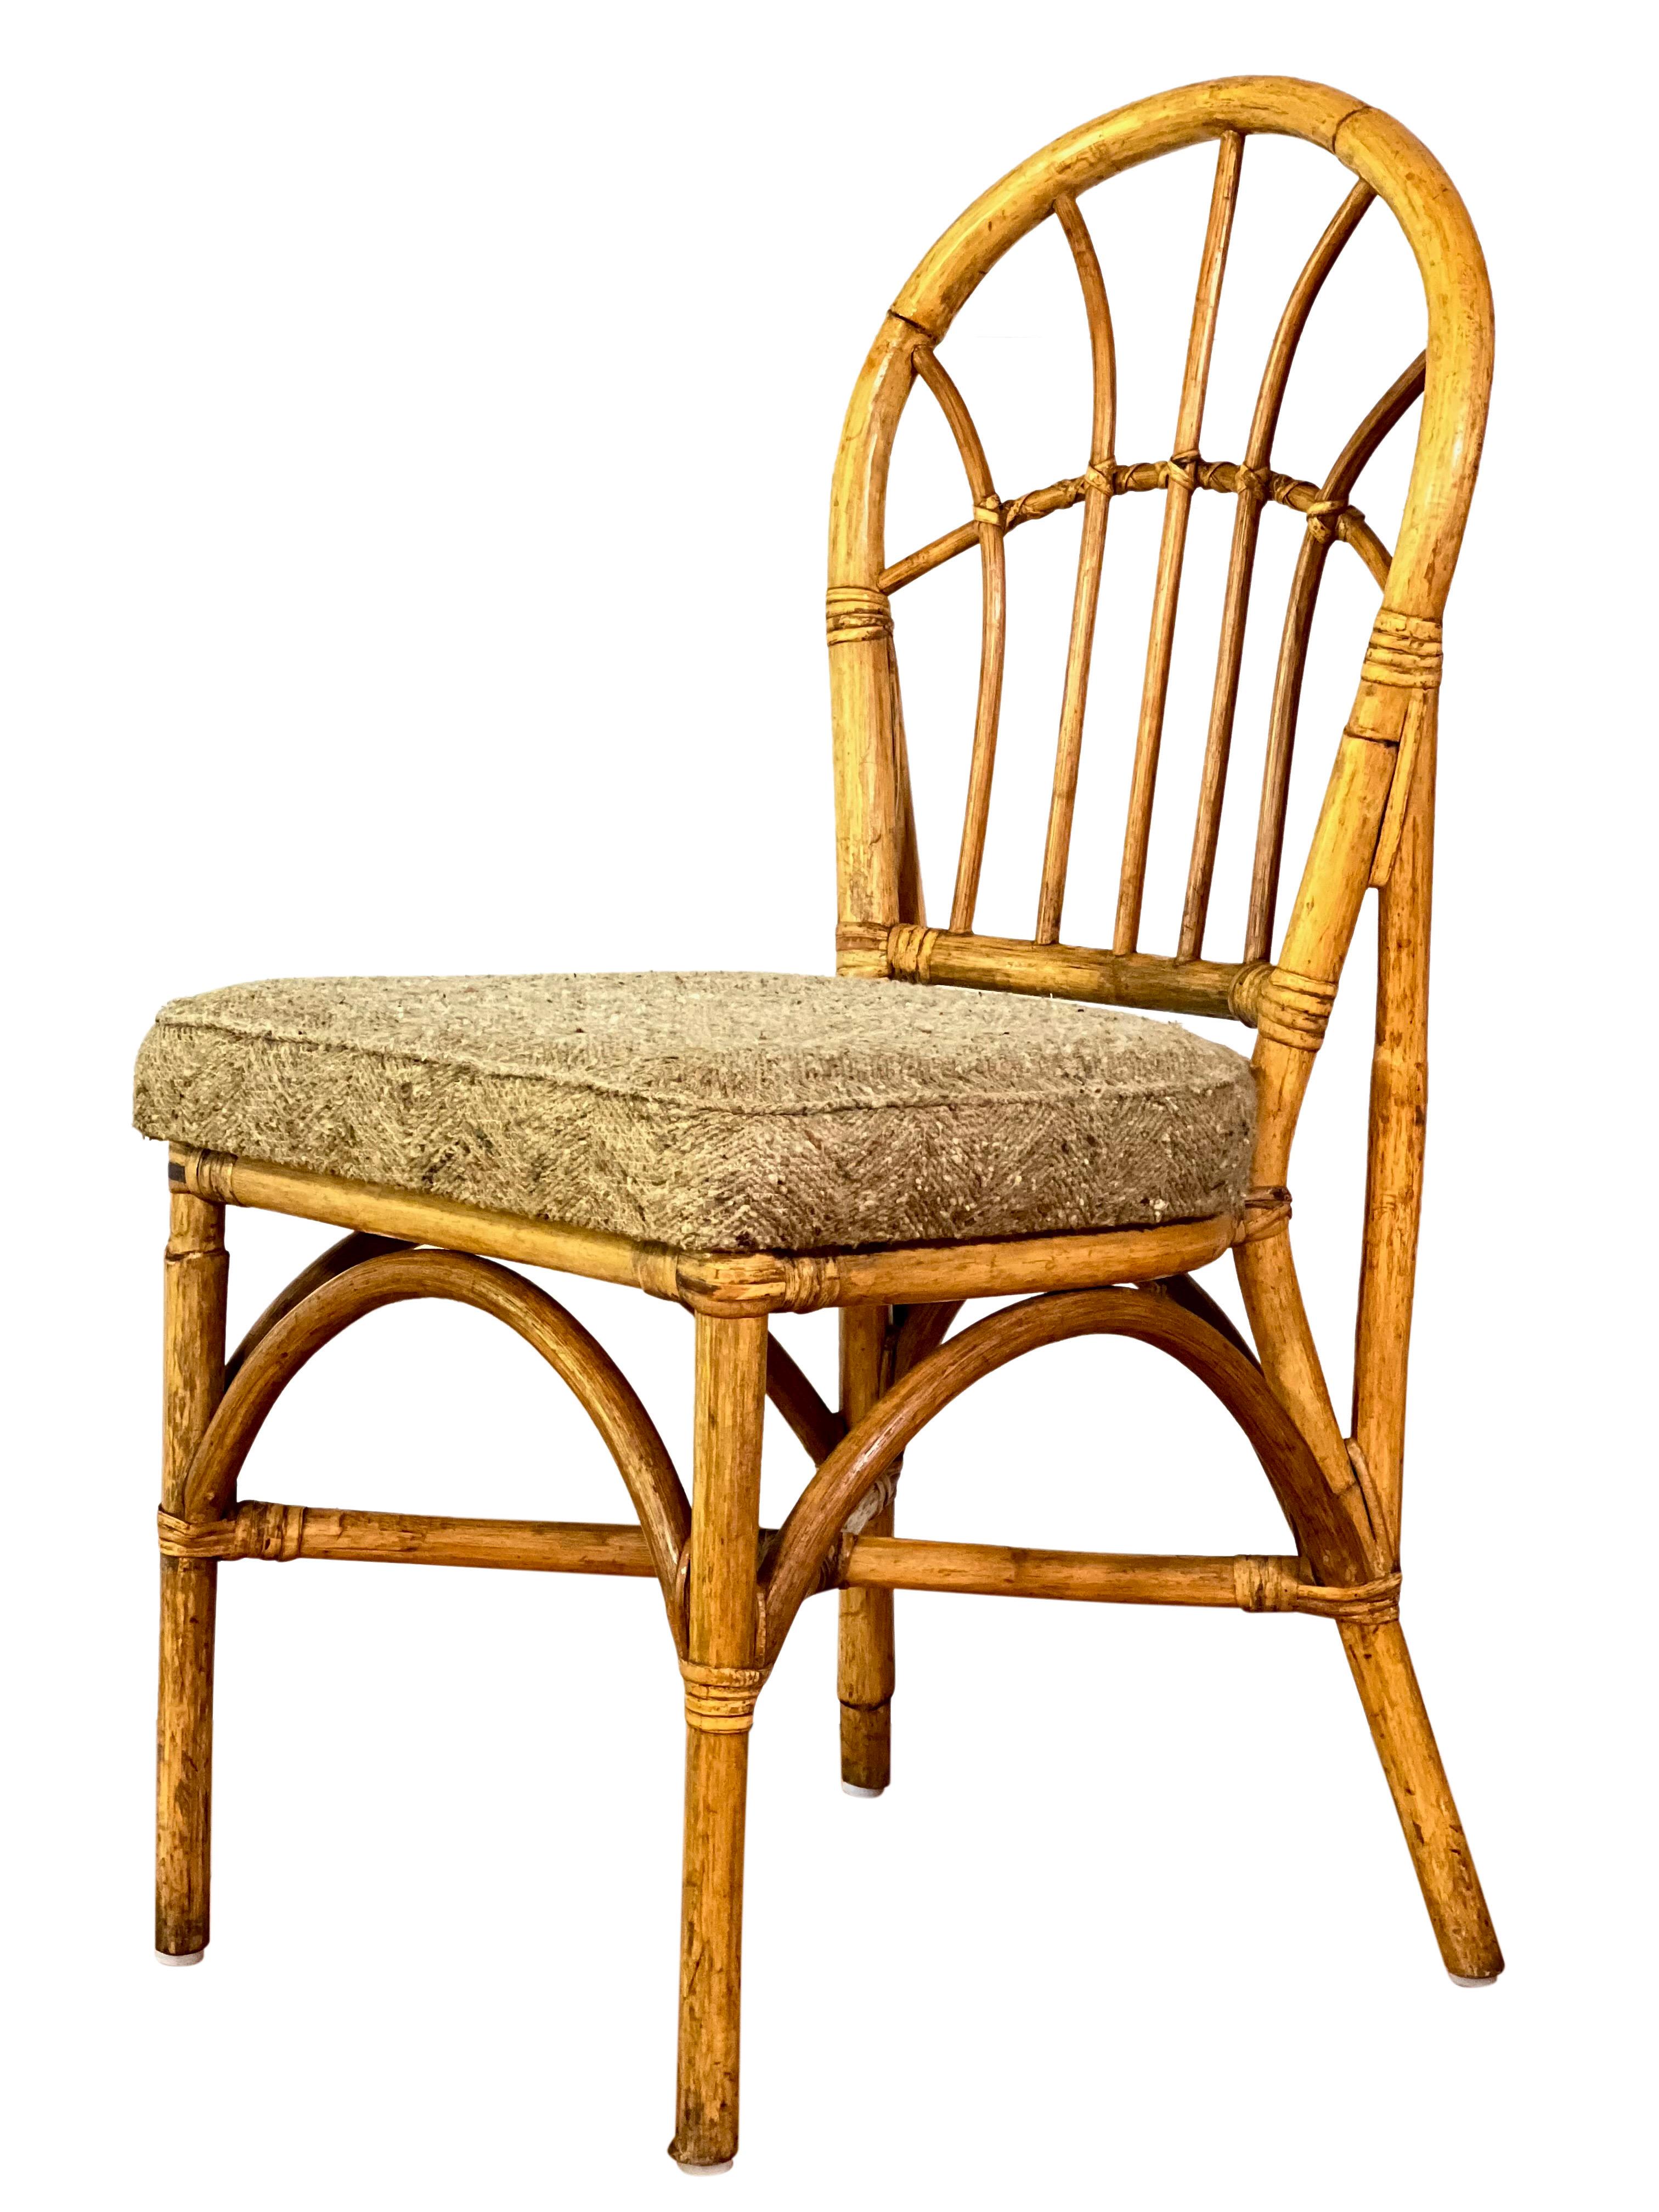 Vintage Bamboo Upholstered Dining Chairs, Set of 4 In Good Condition For Sale In Doylestown, PA